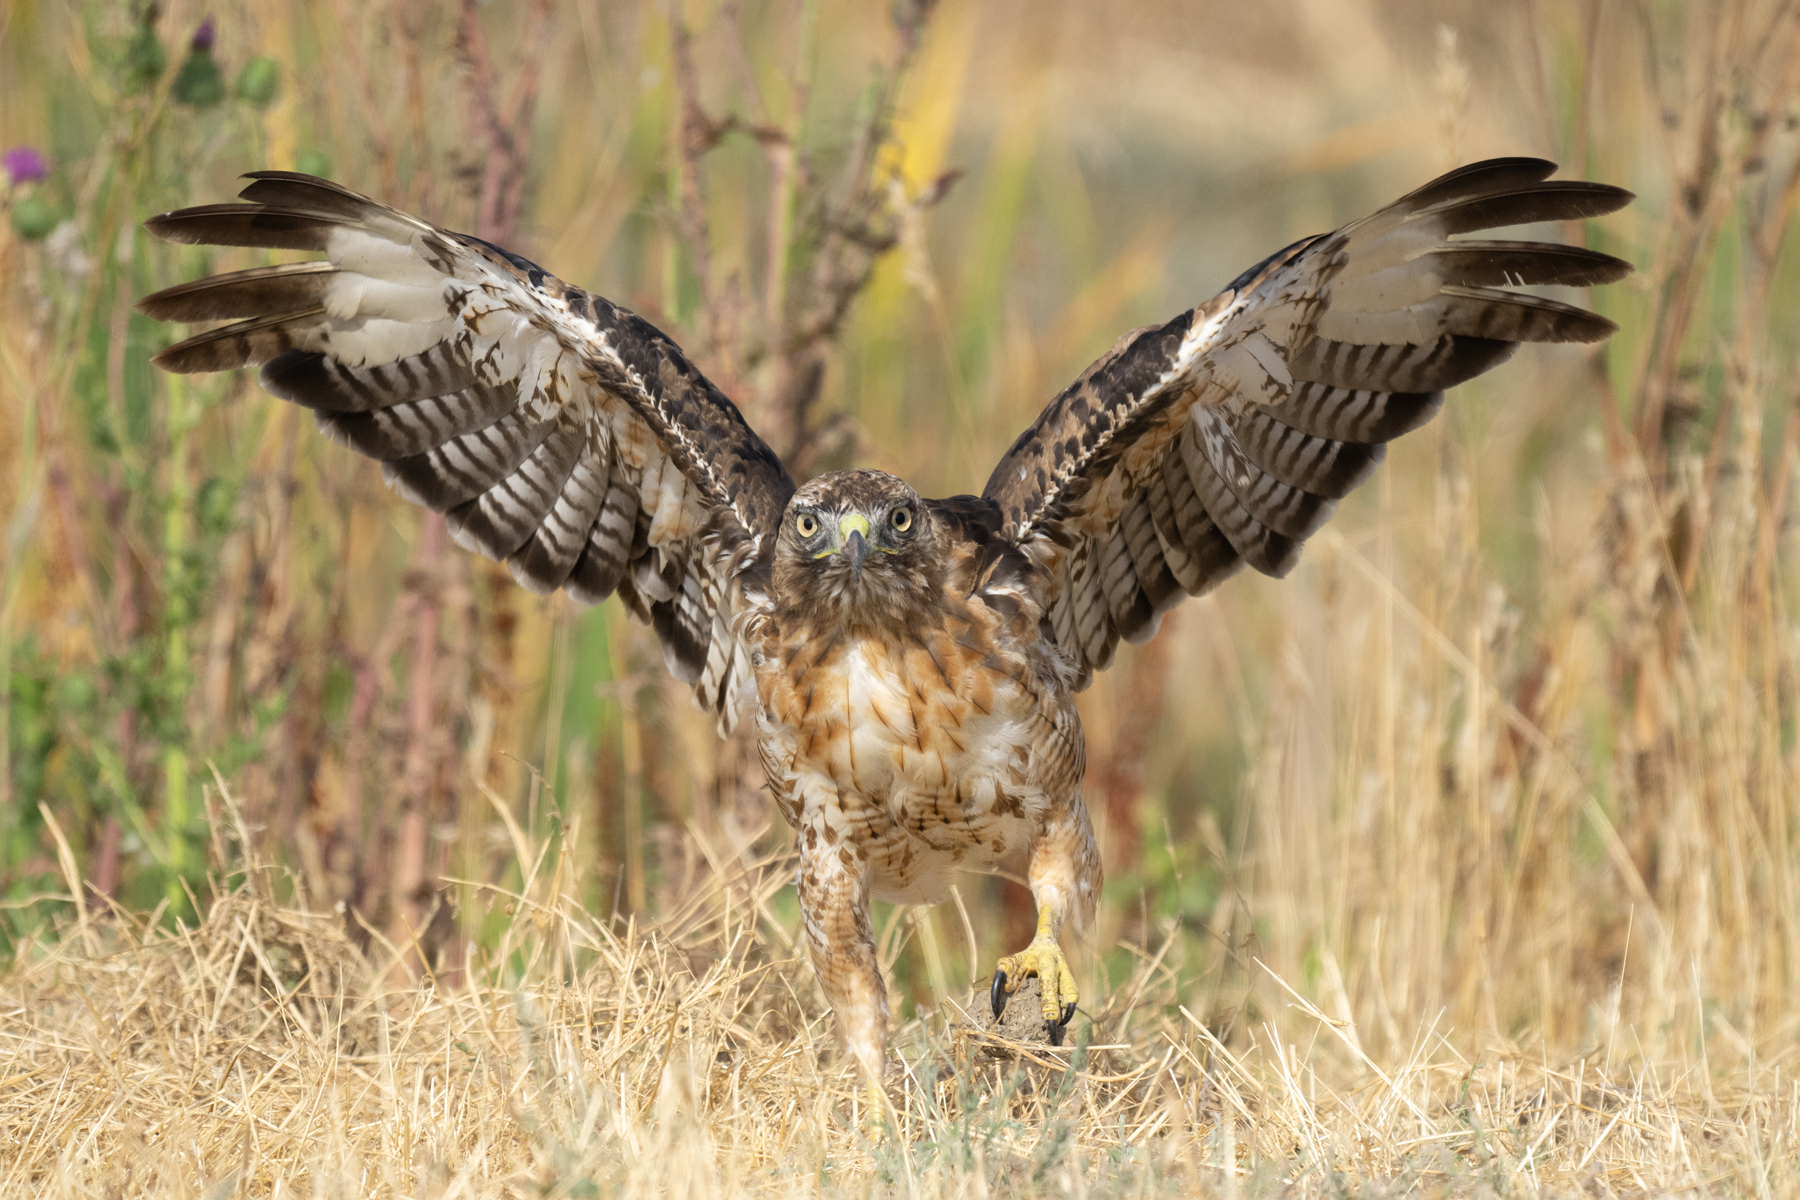 RED TAIL SPREADS ITS WINGS backcountry gallery _DSC4944.jpg